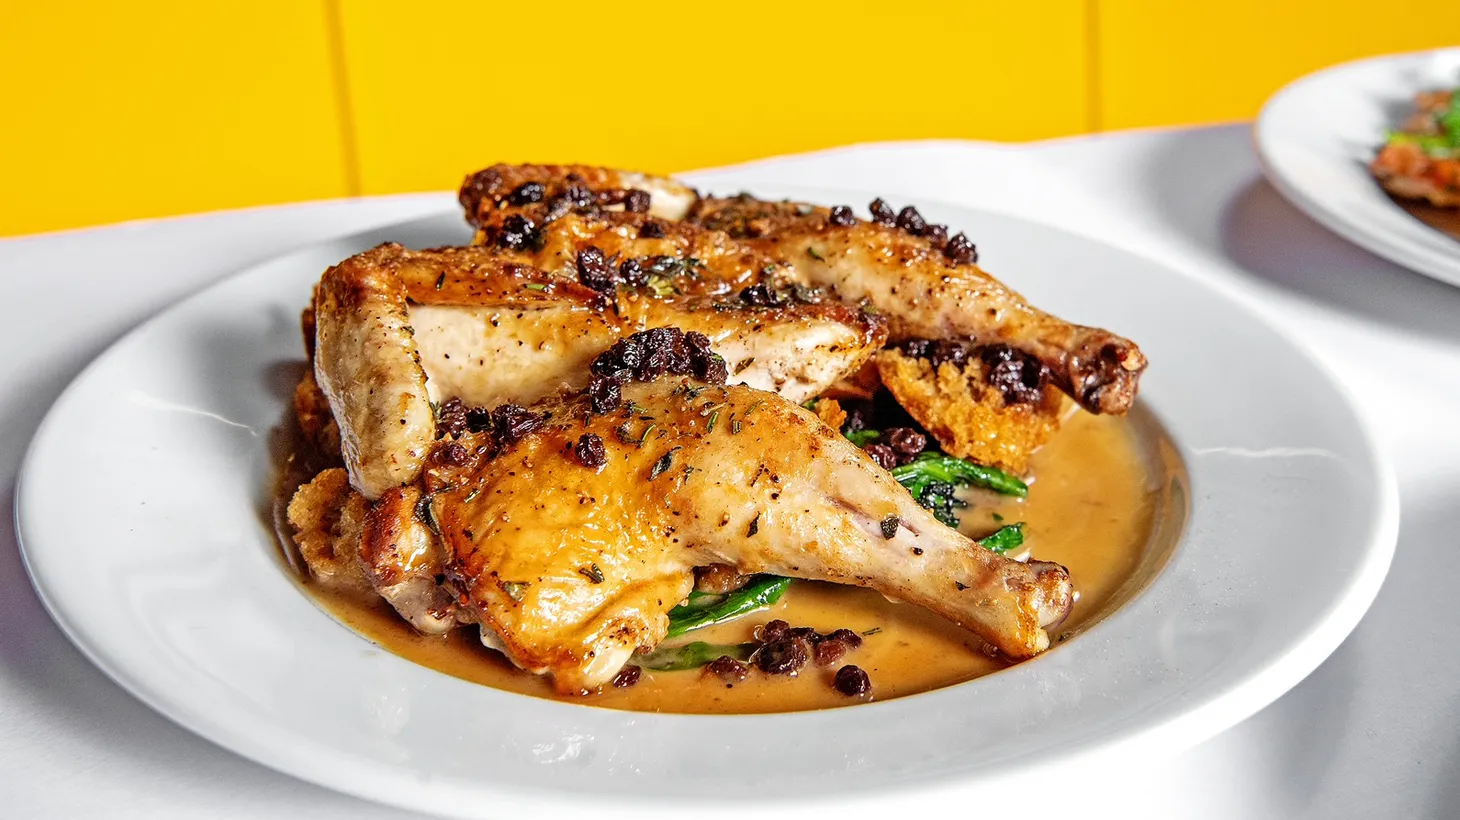 Bill Addison recommends the cornish game hen at Horses in Hollywood.